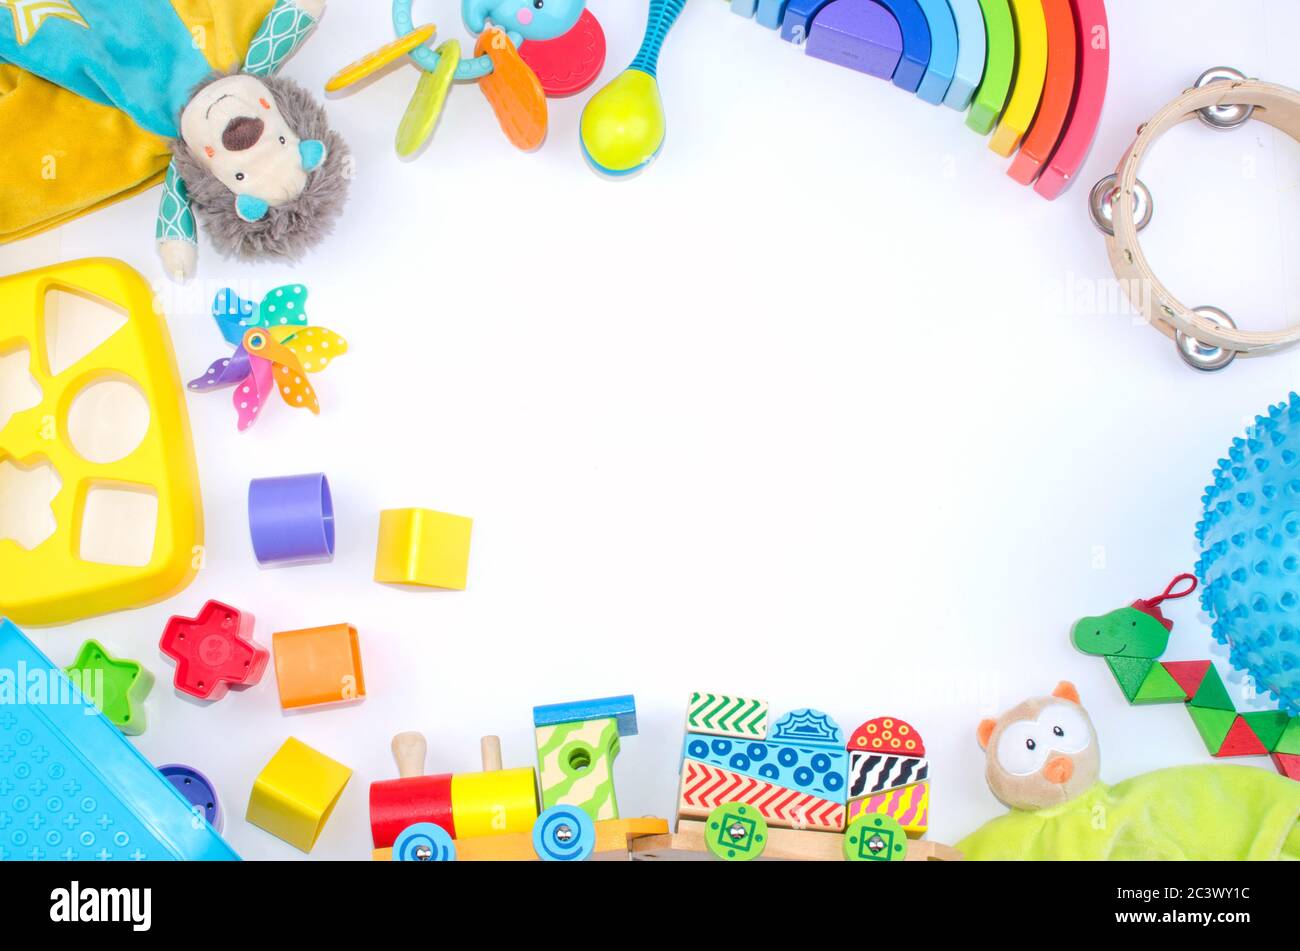 circle of colored toys and space for text in the middle of the image Stock Photo